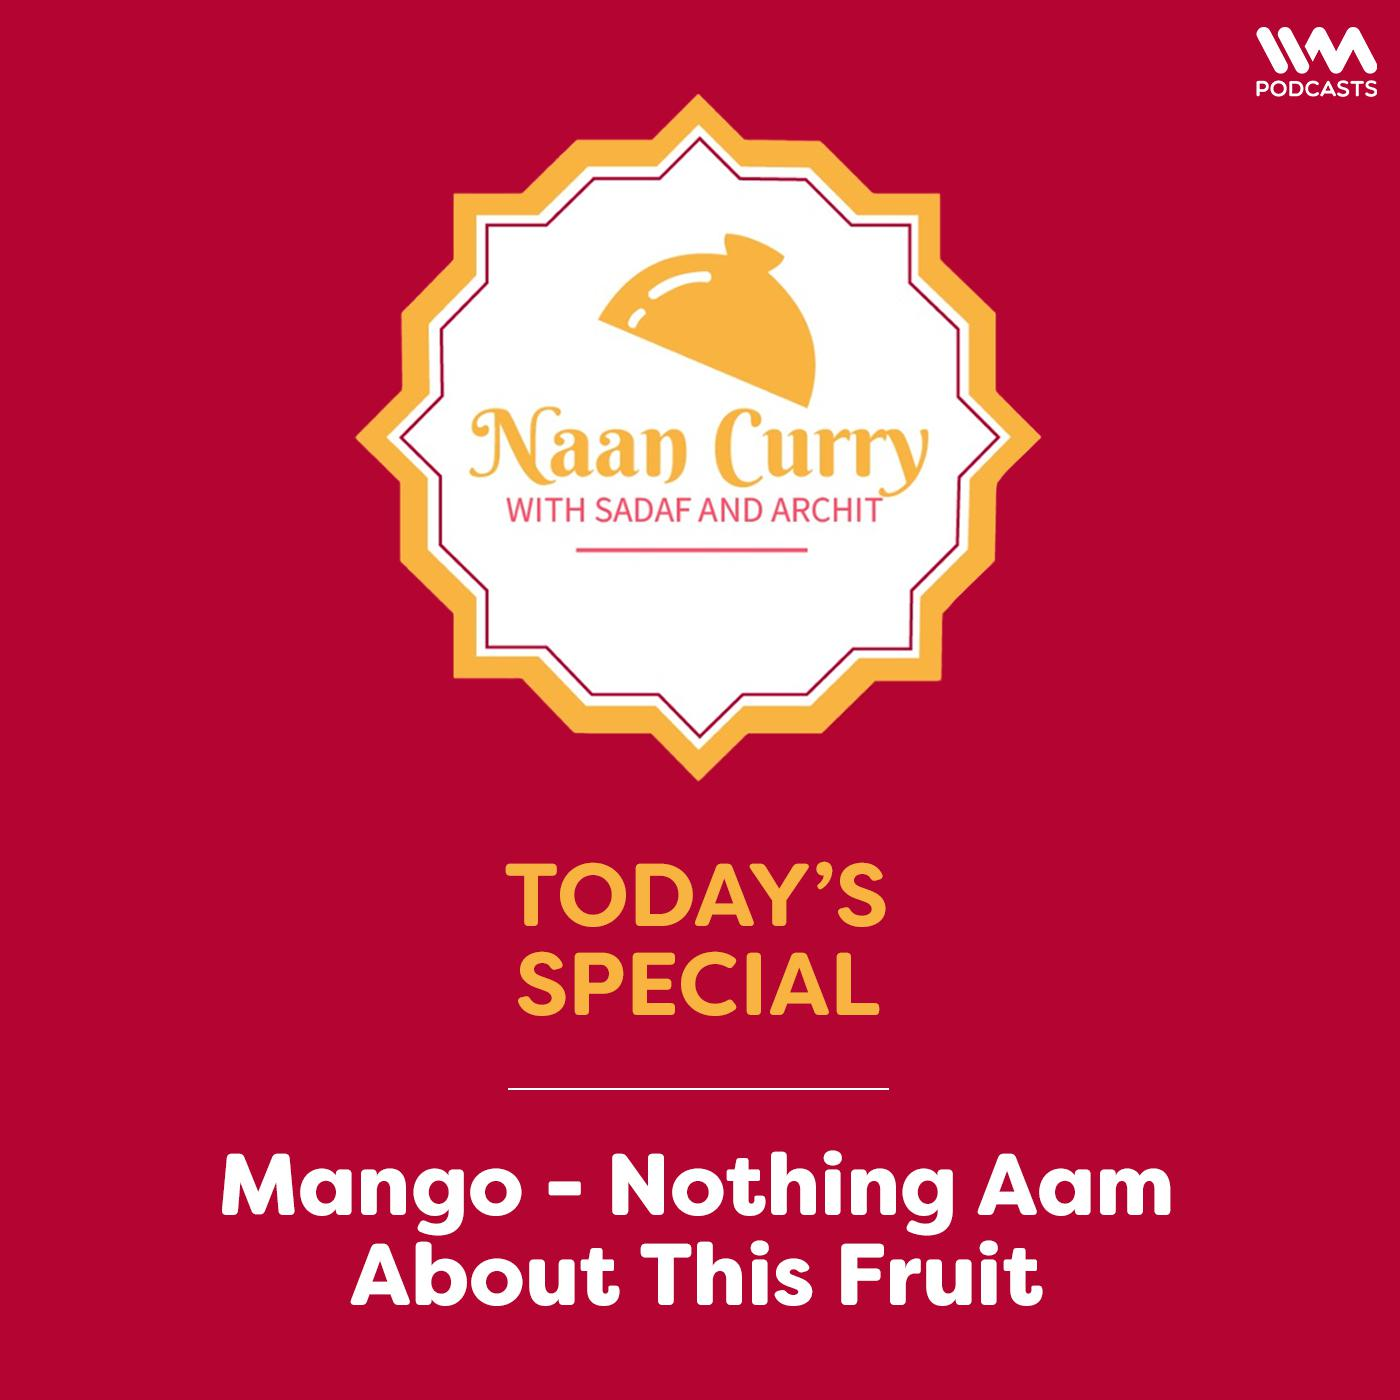 Mango- Nothing Aam About This Fruit